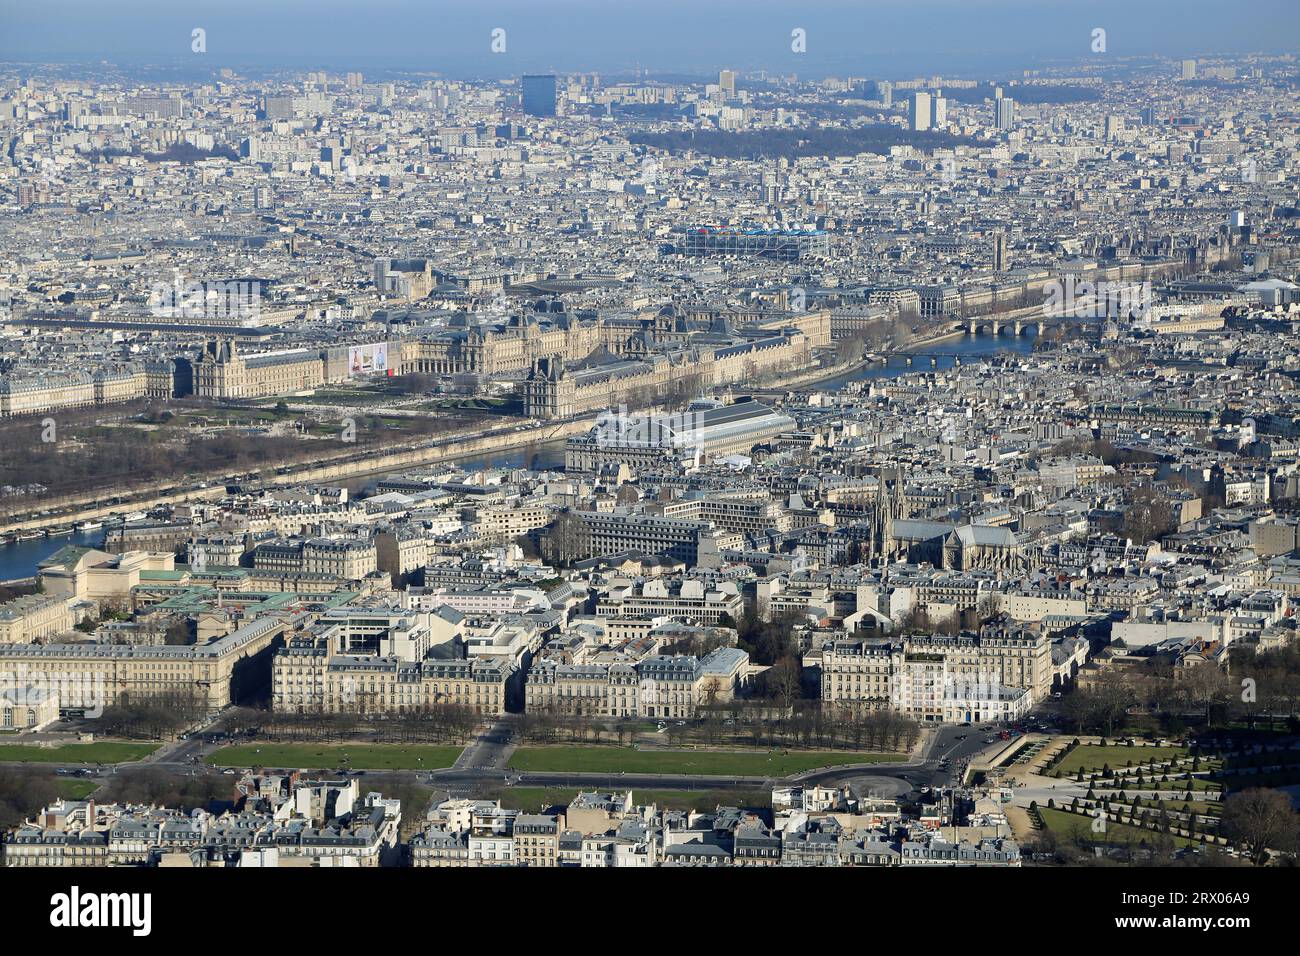 Louvre on Seine River, view from Eiffel Tower, Paris Stock Photo